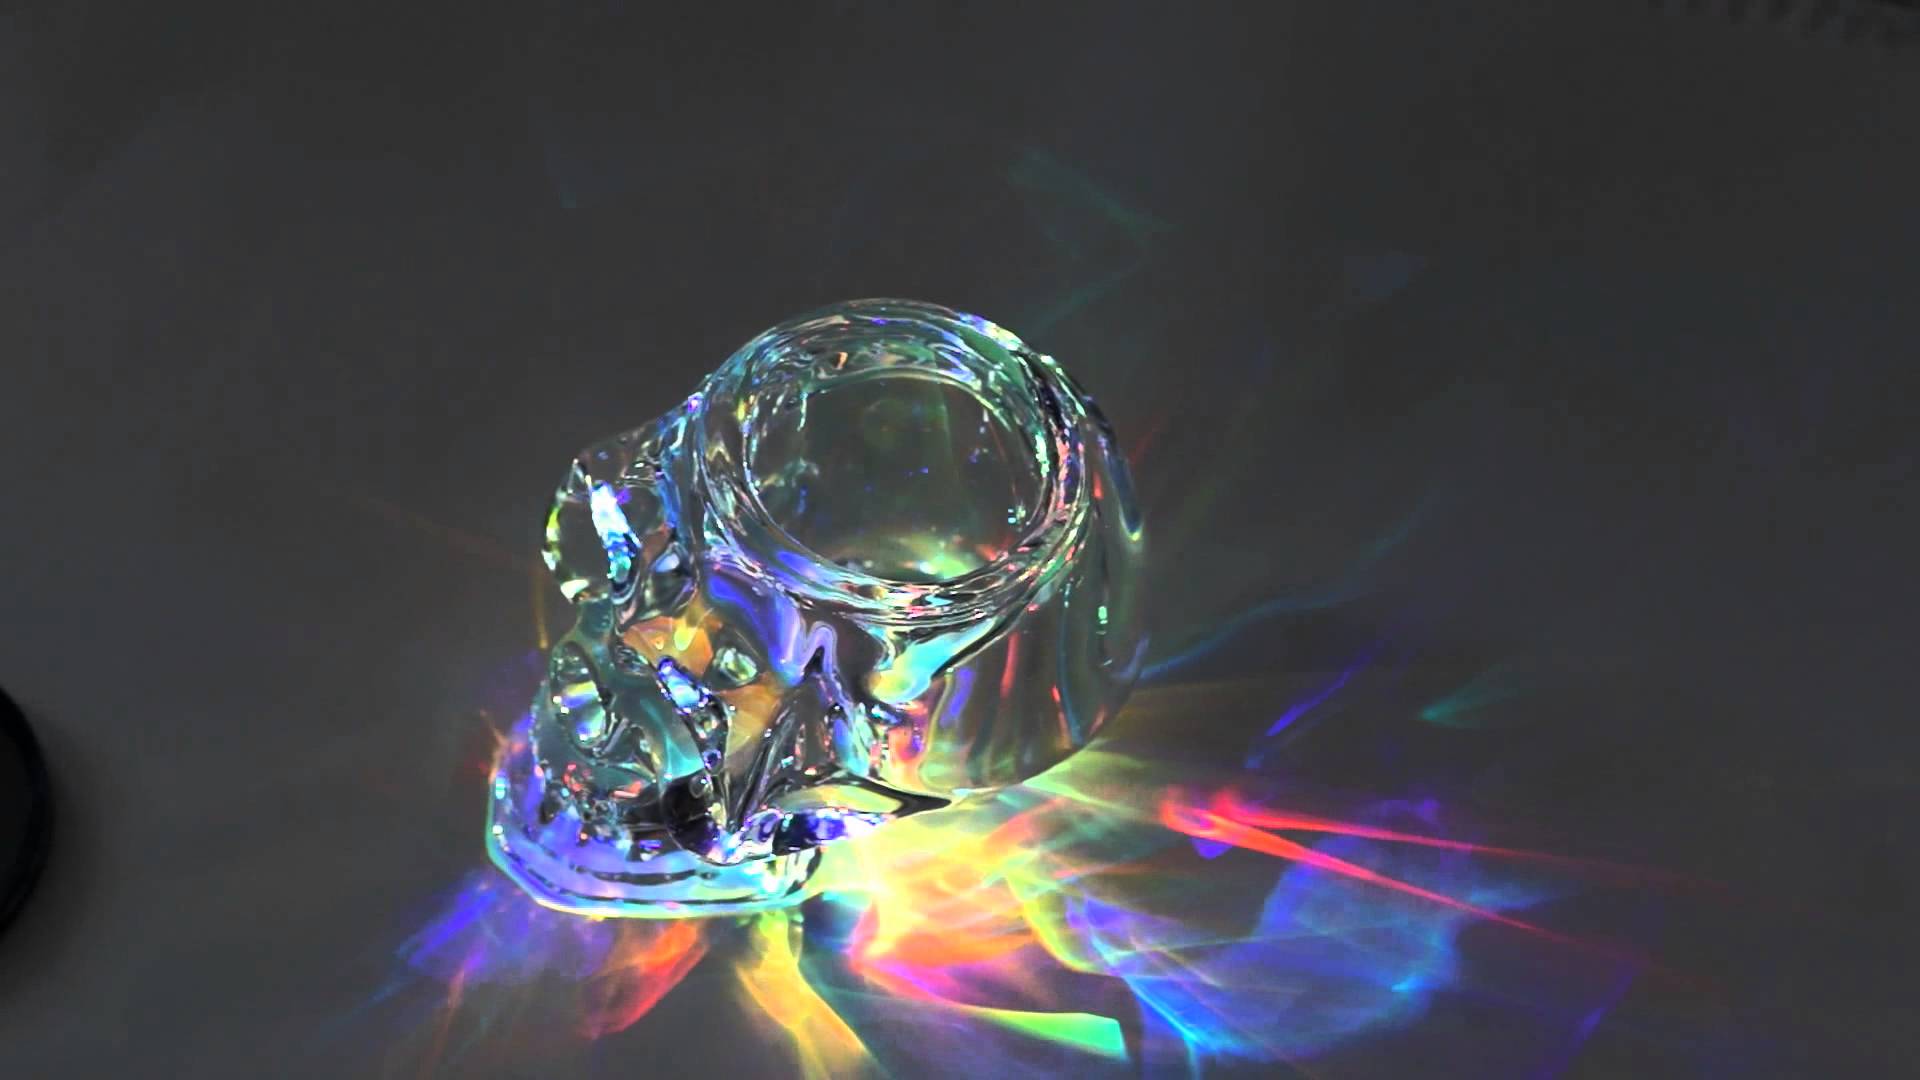 Cool Crystal Skull Prism Light Effects - YouTube